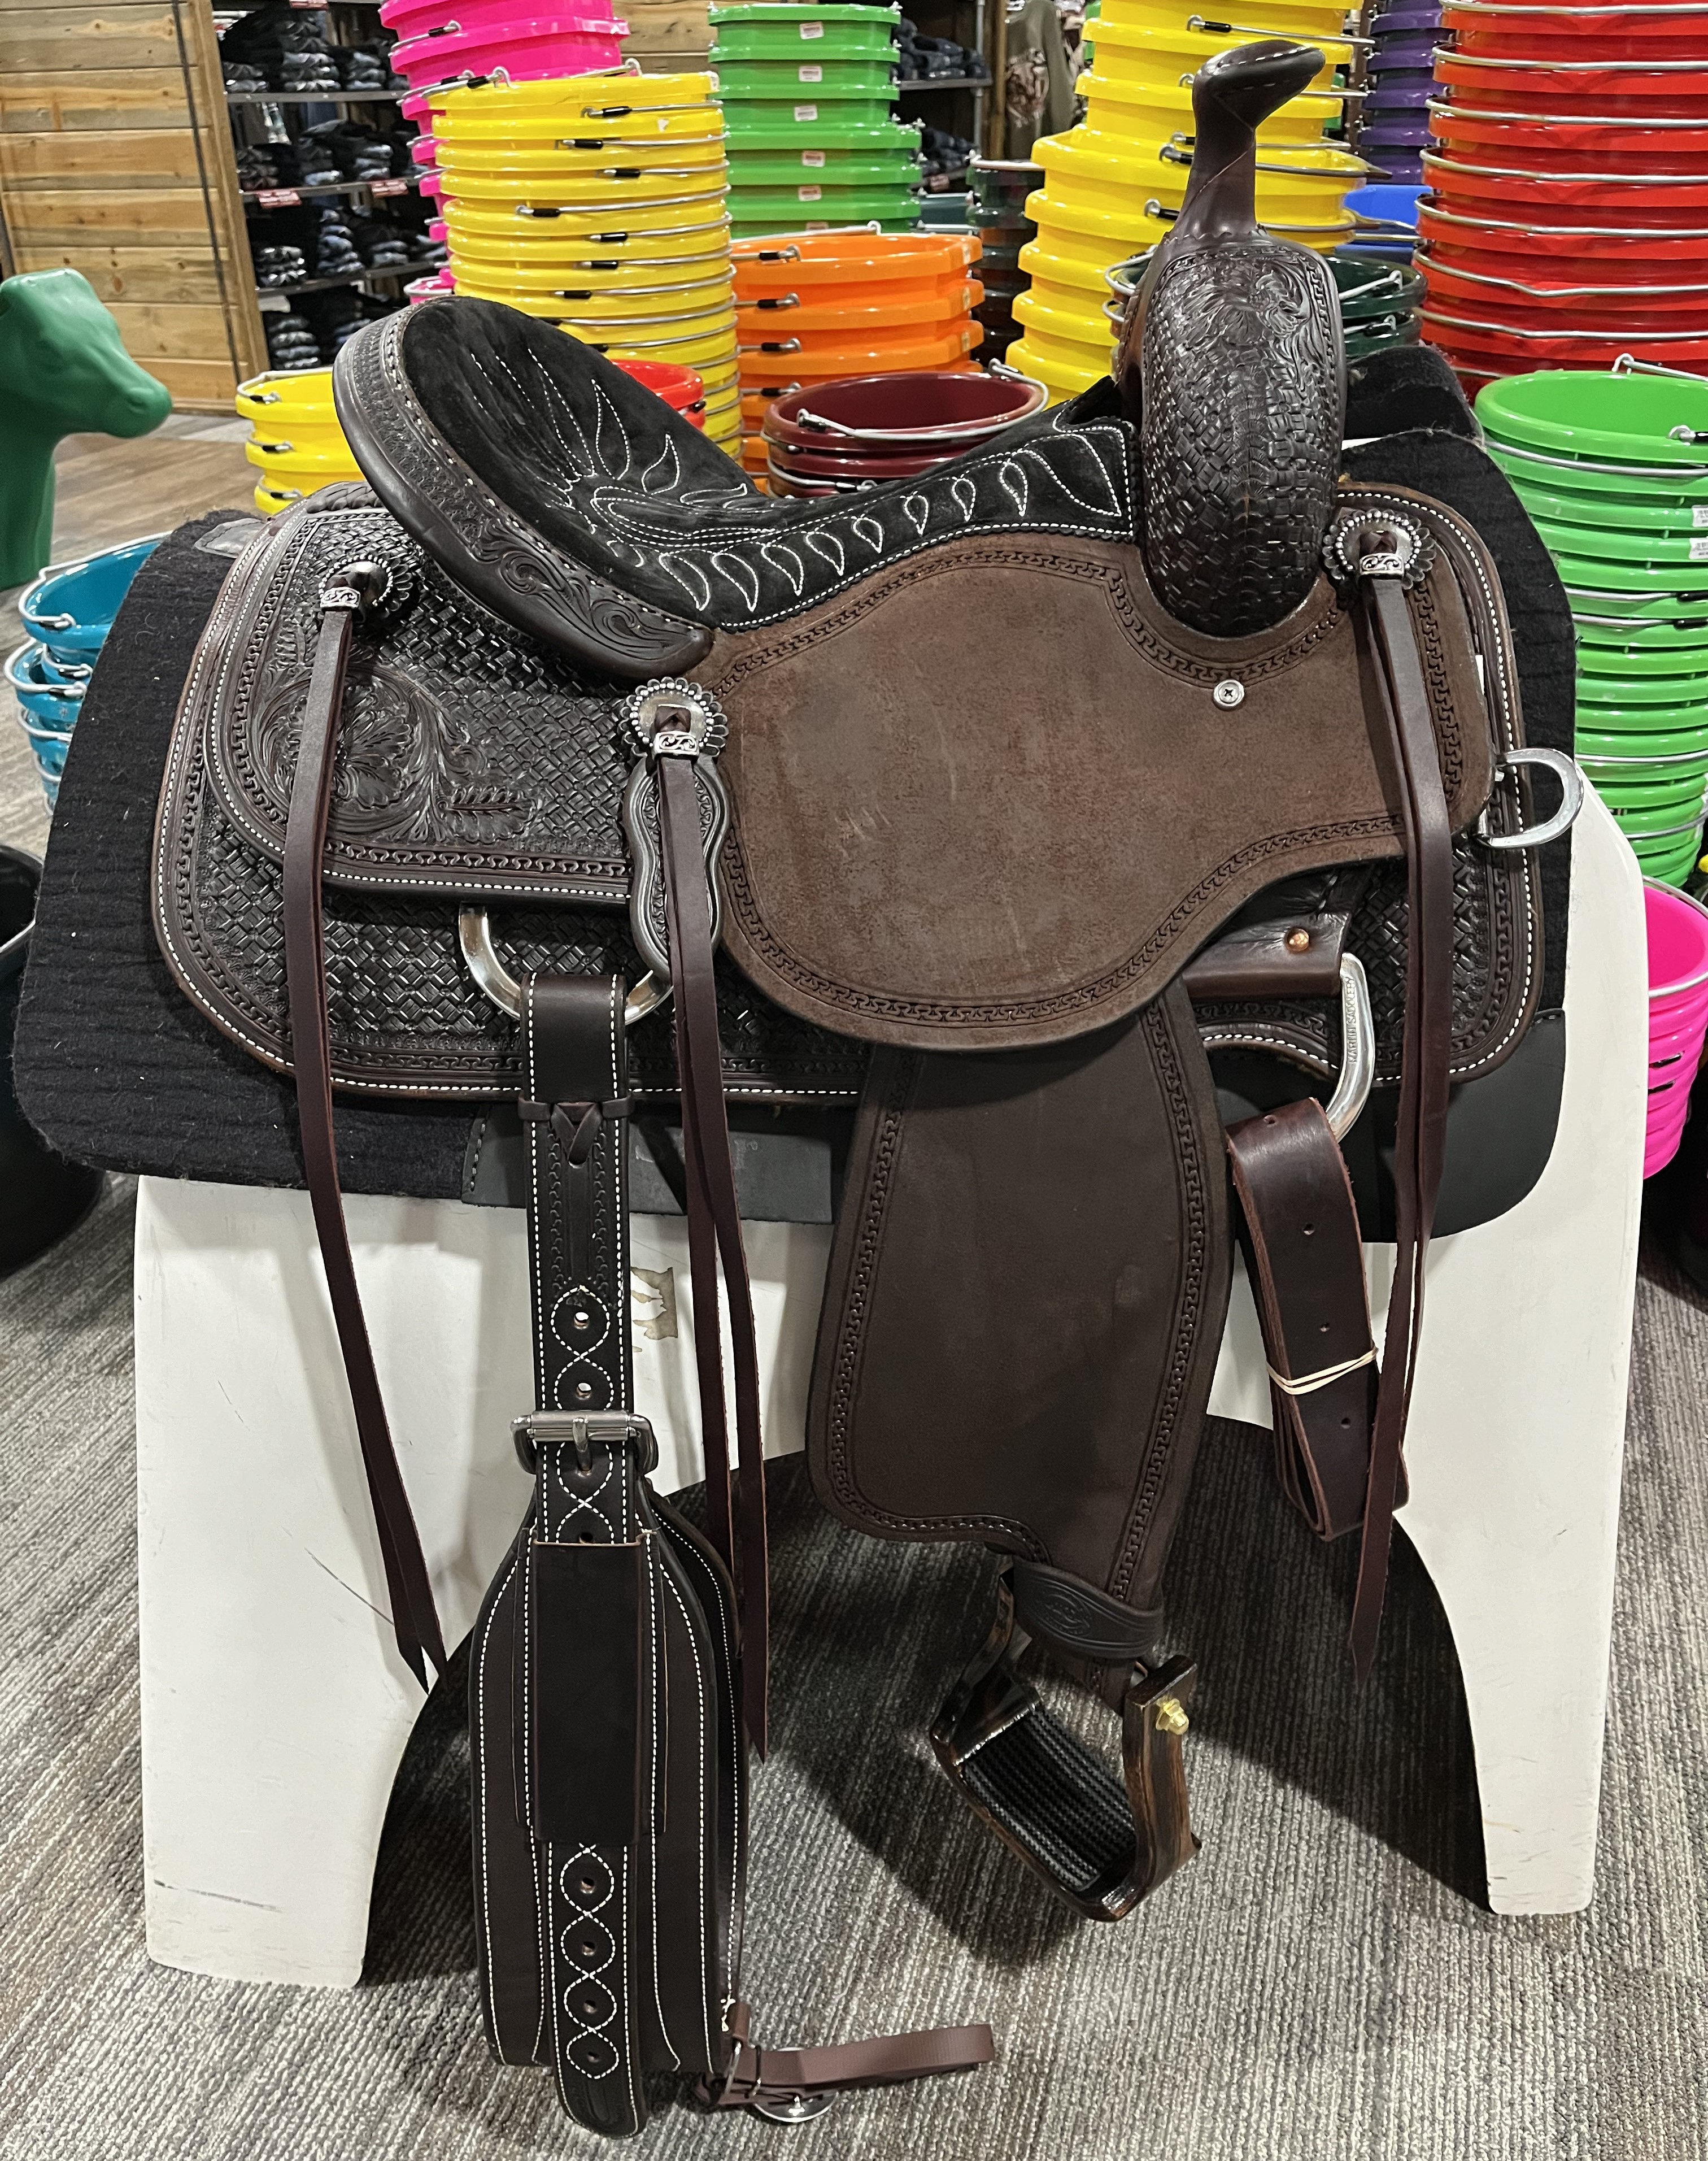 14" Chocolate All-Around with Full Black Seat by Martin Saddlery